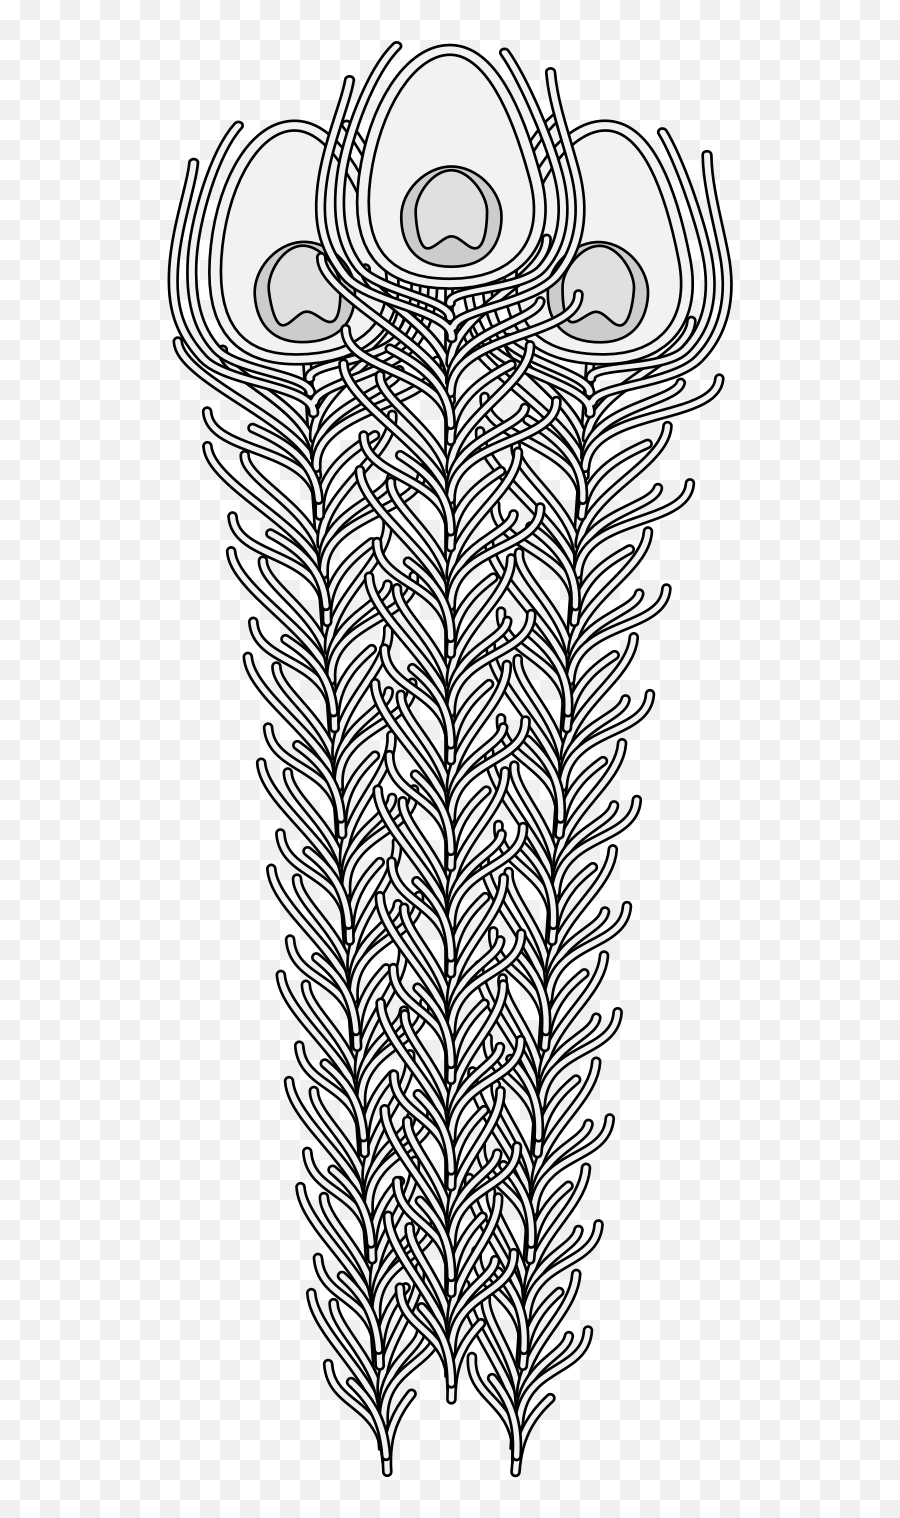 Peacock - Traceable Heraldic Art Fern Png,Peacock Feather Png